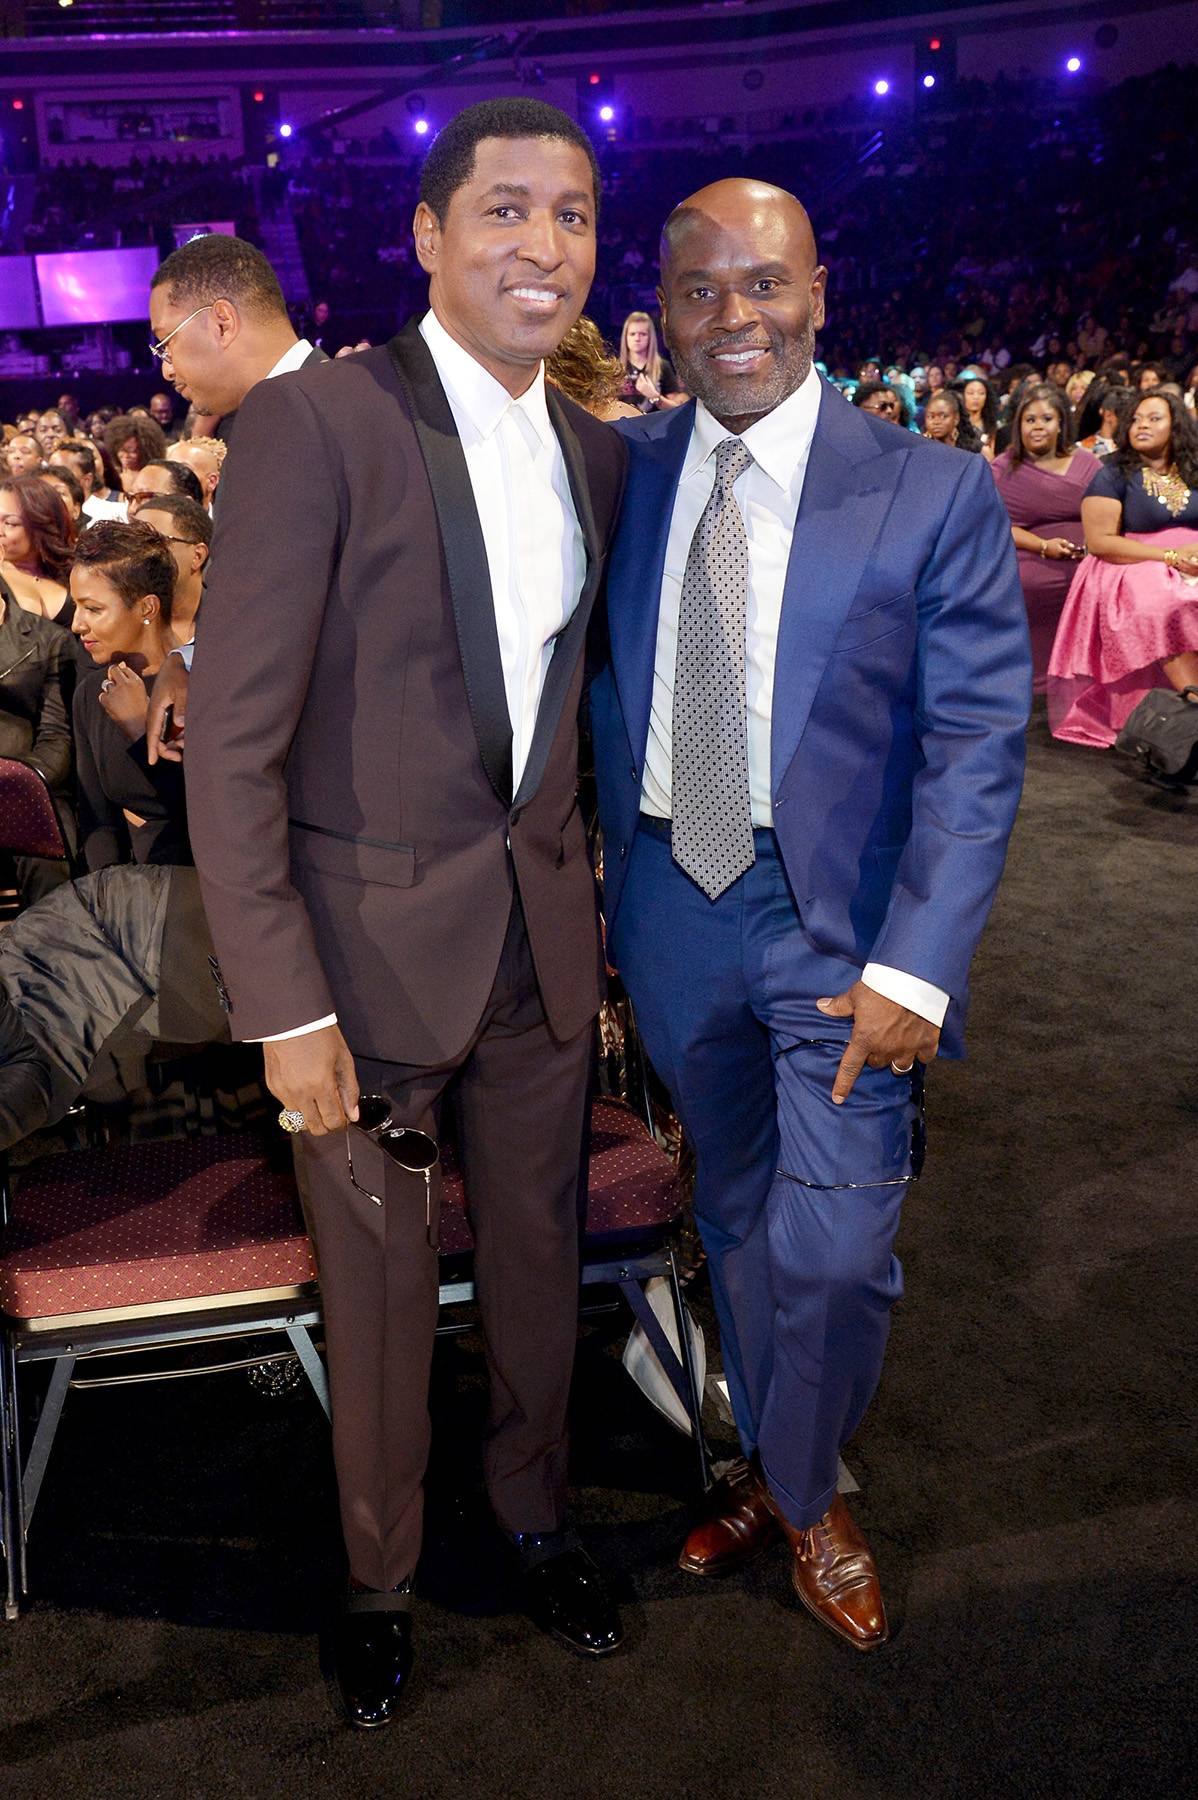 LaFace of the Label: L.A. Reid - Kenneth &quot;Babyface&quot; Edmonds and L.A. Reid got their start in the music business together in the R&amp;B group, The Deele. And it's been quite a long and remarkable road of success for them, from Grammy-award winning songs to writing, producing and developing for some of the most established megastar artists. (Photo: Paras Griffin/BET/Getty Images for BET)